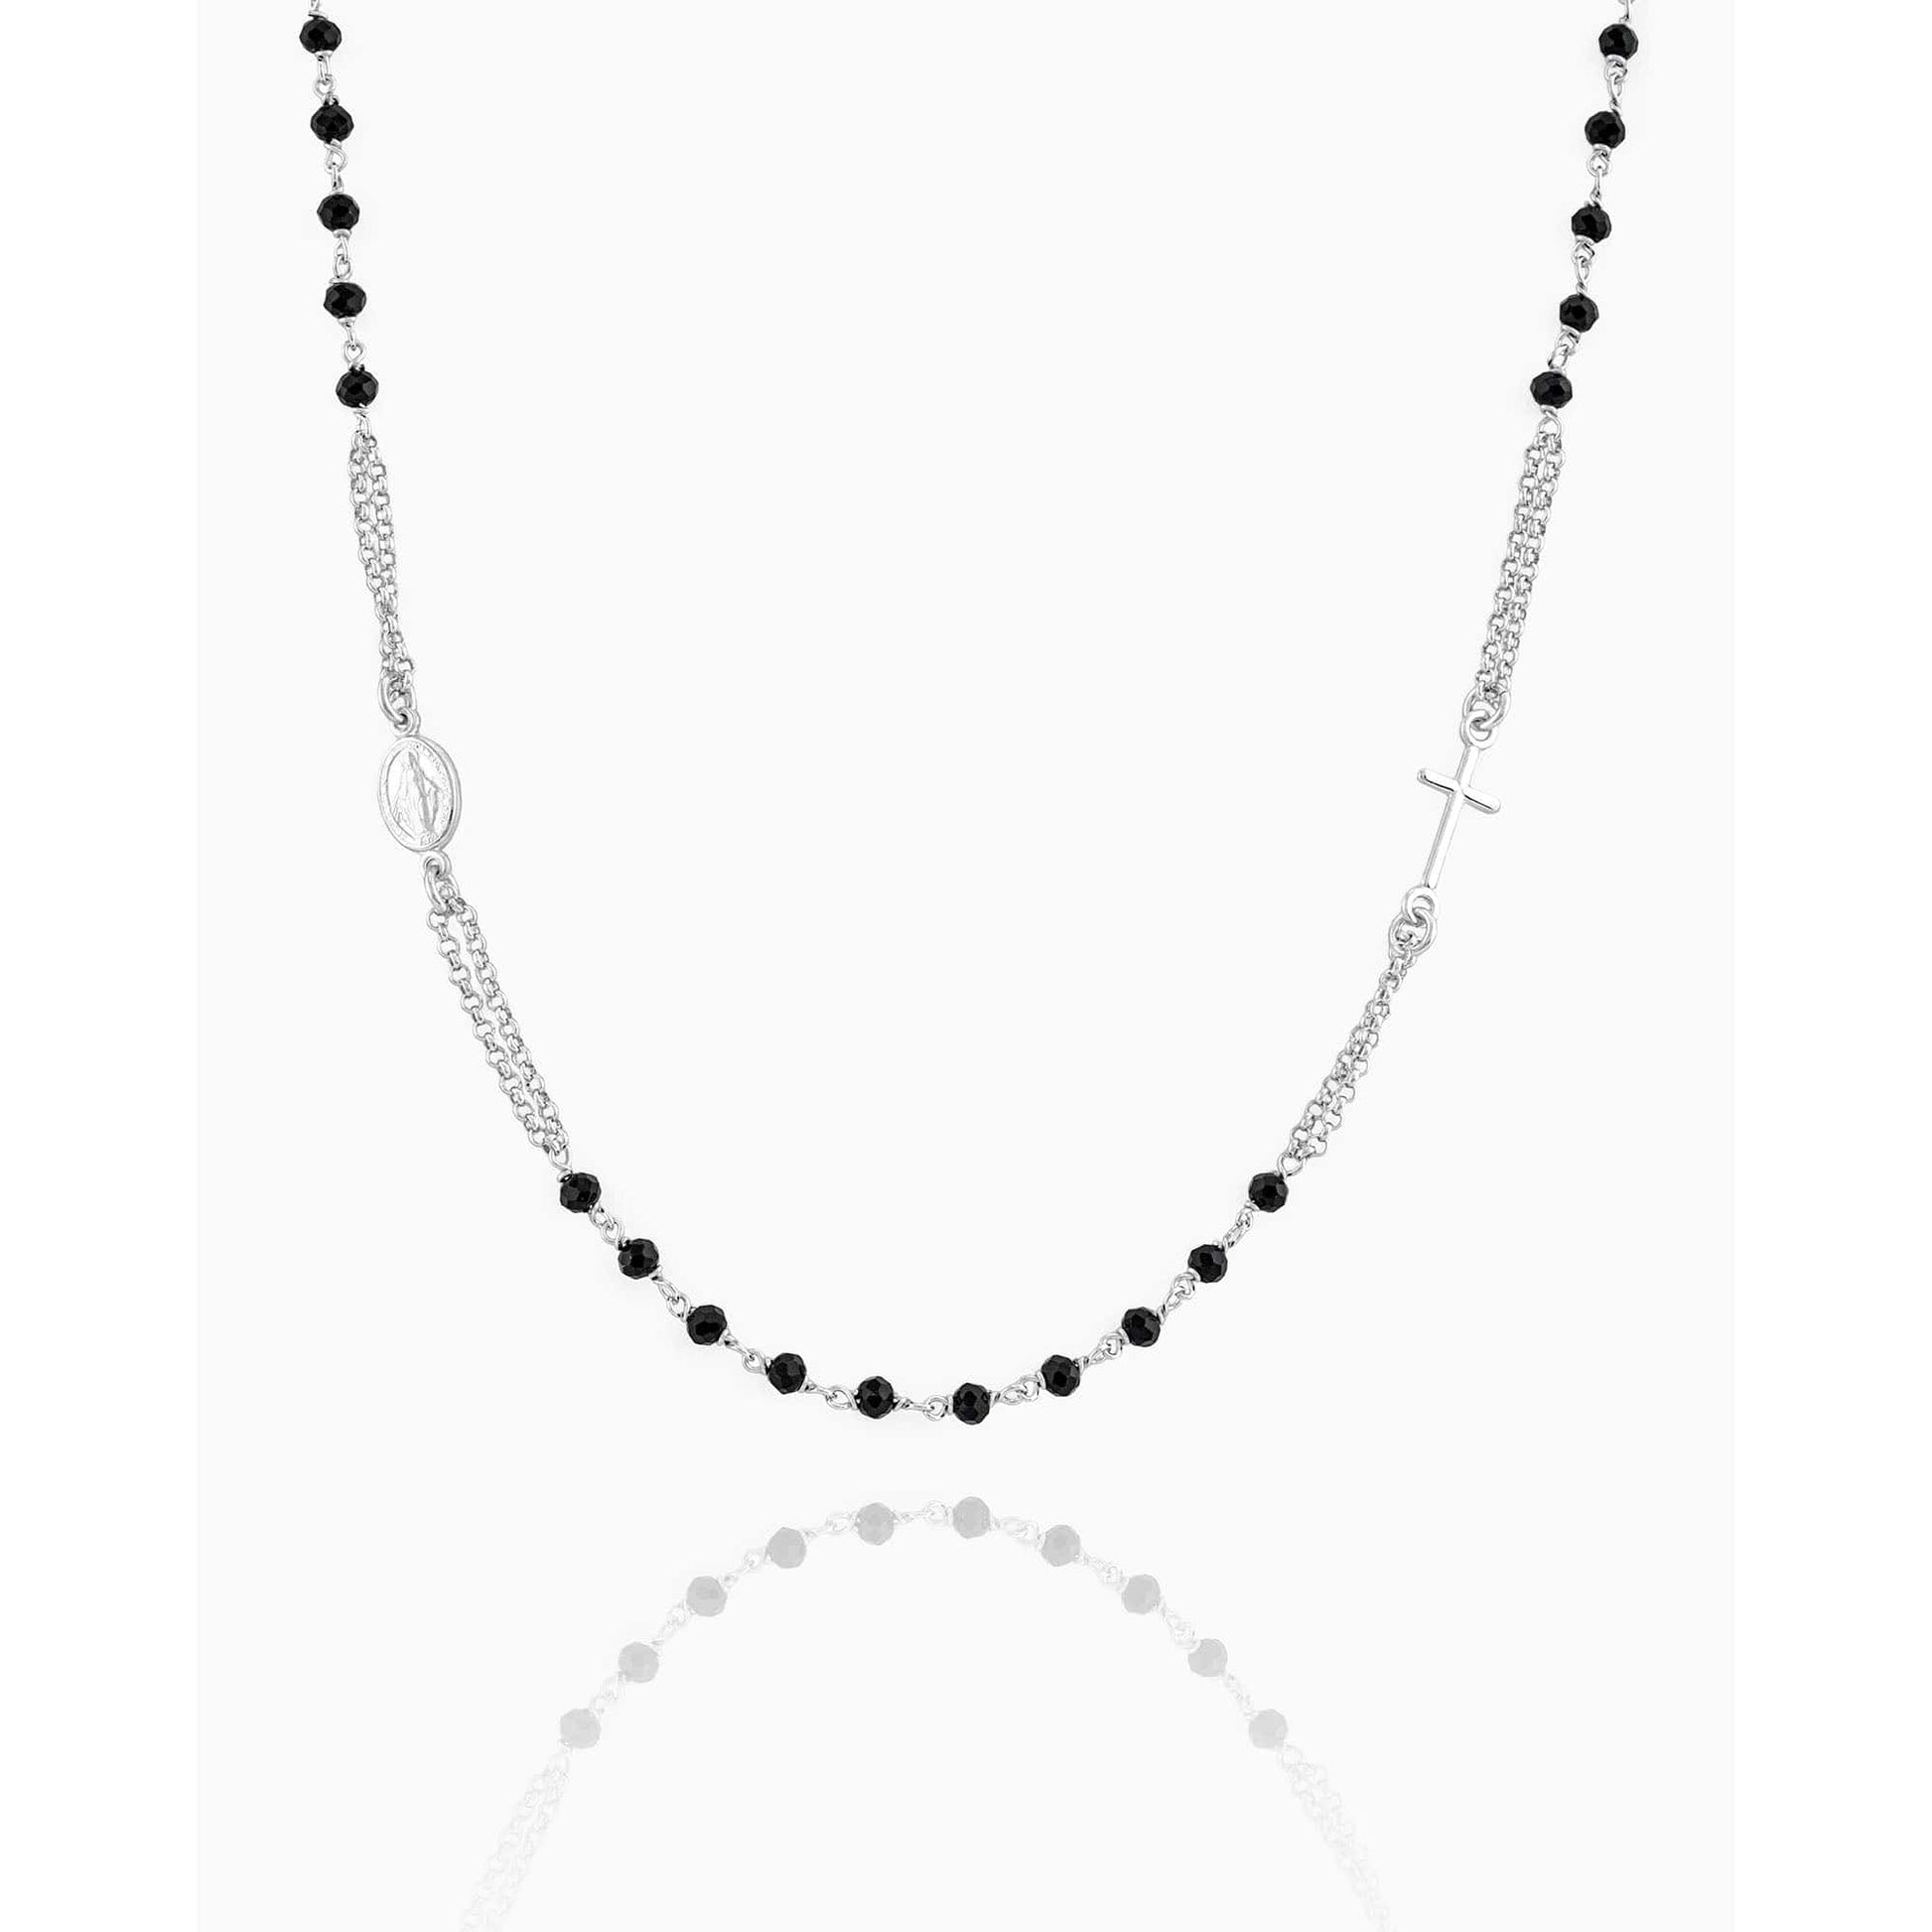 MONDO CATTOLICO Prayer Beads STERLING SILVER PLATED SACRED HEART 2MM BLACK BEADS NECKLACE